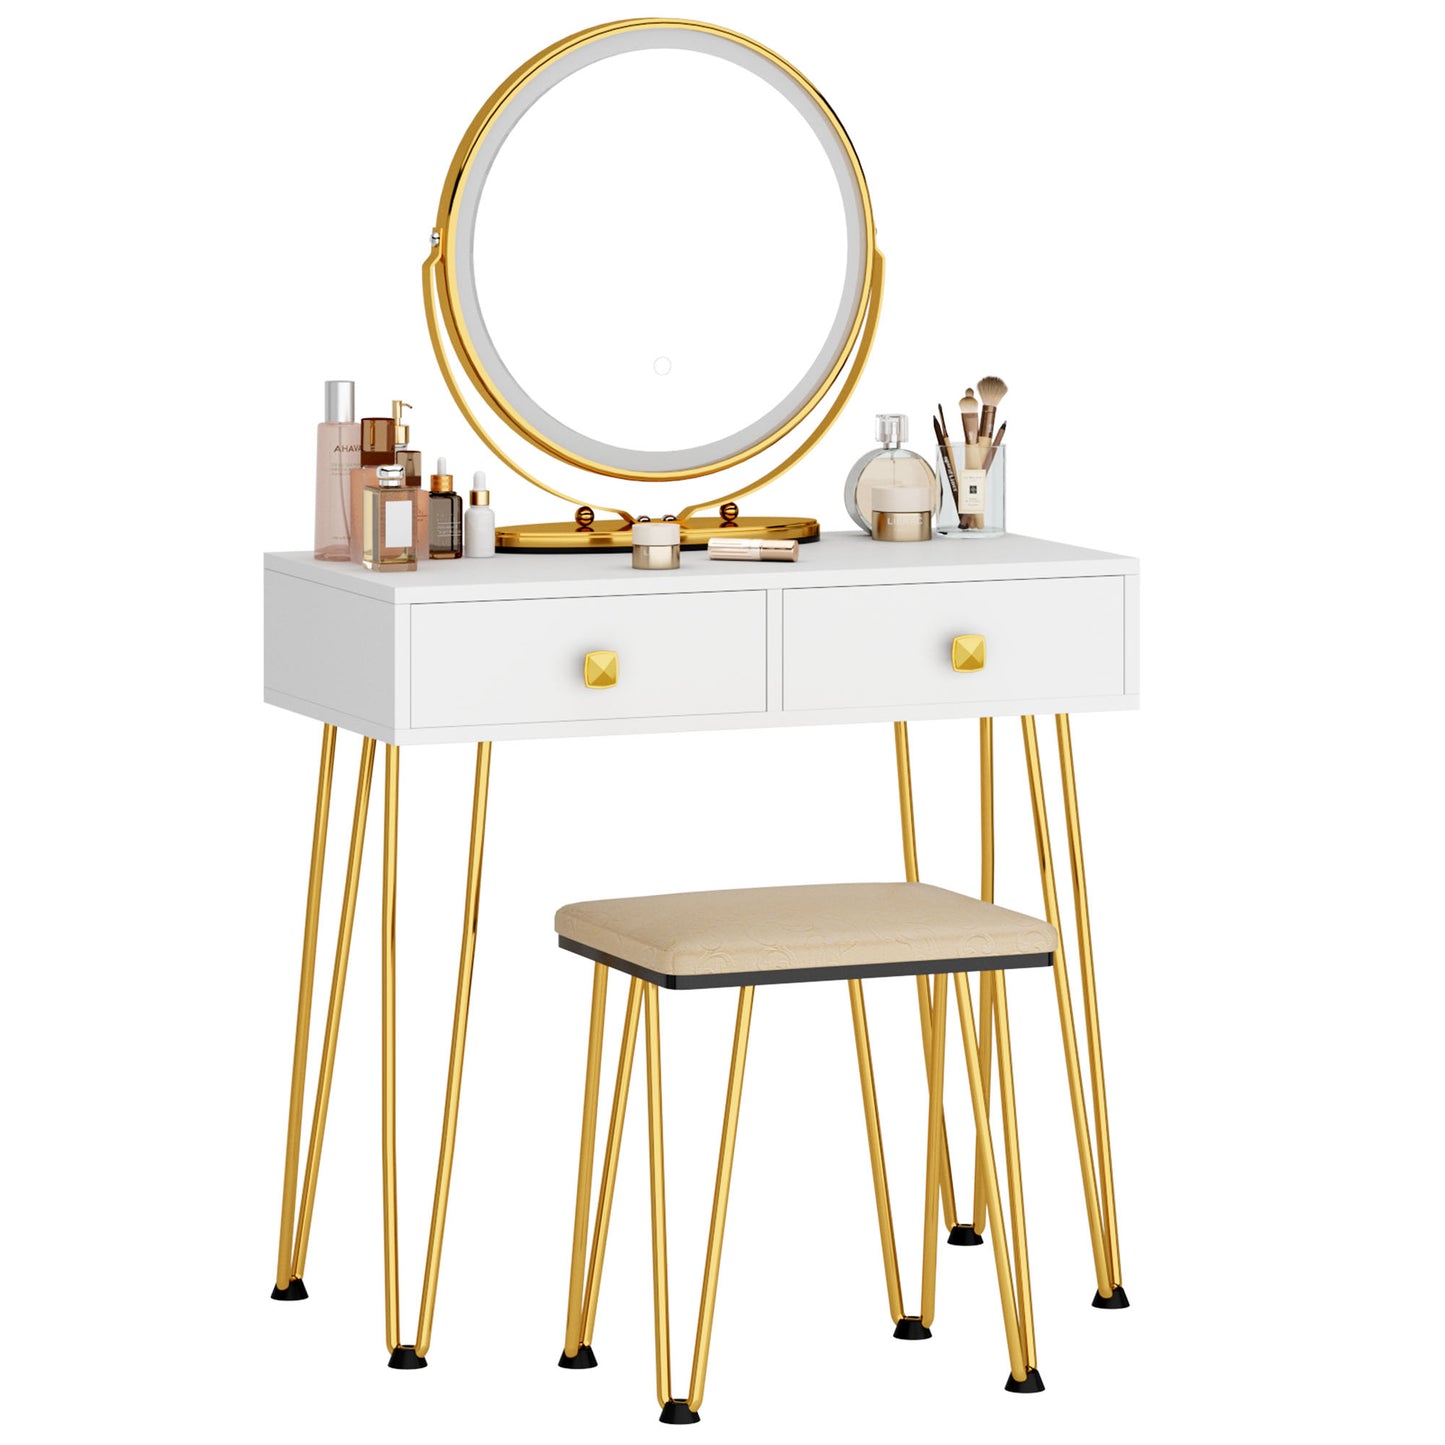 SogesPower Vanity Dressing Table with Round Mirror, Solid Wood Frame - Fashion White